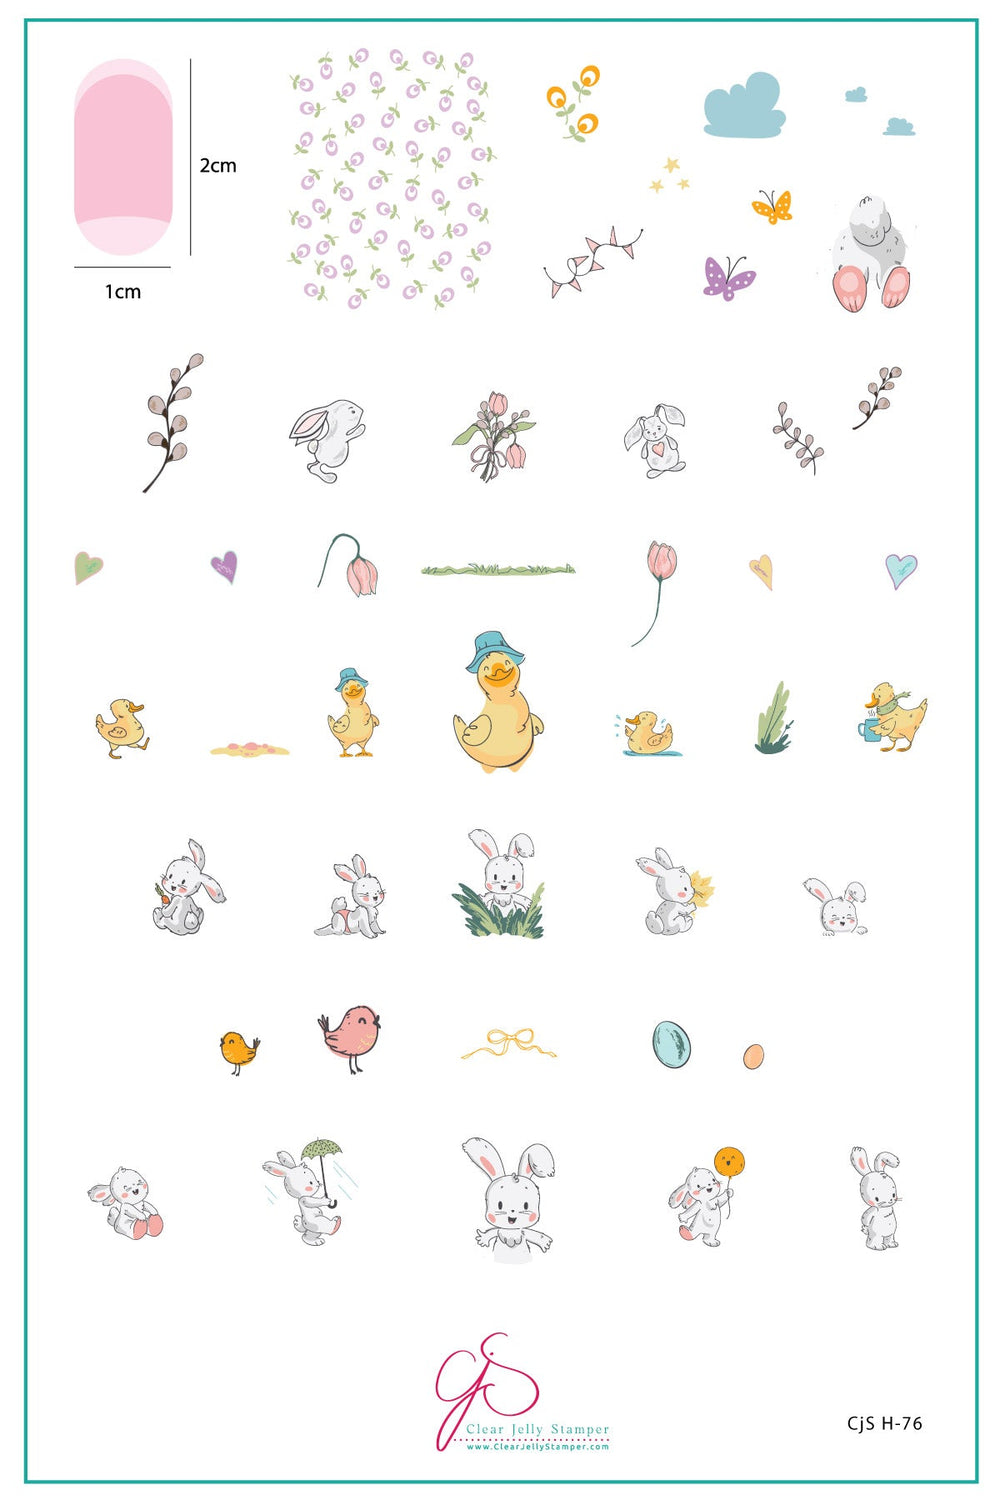 CJSH-76 Fuzzy Easter |  Clear Jelly Stamping Plate